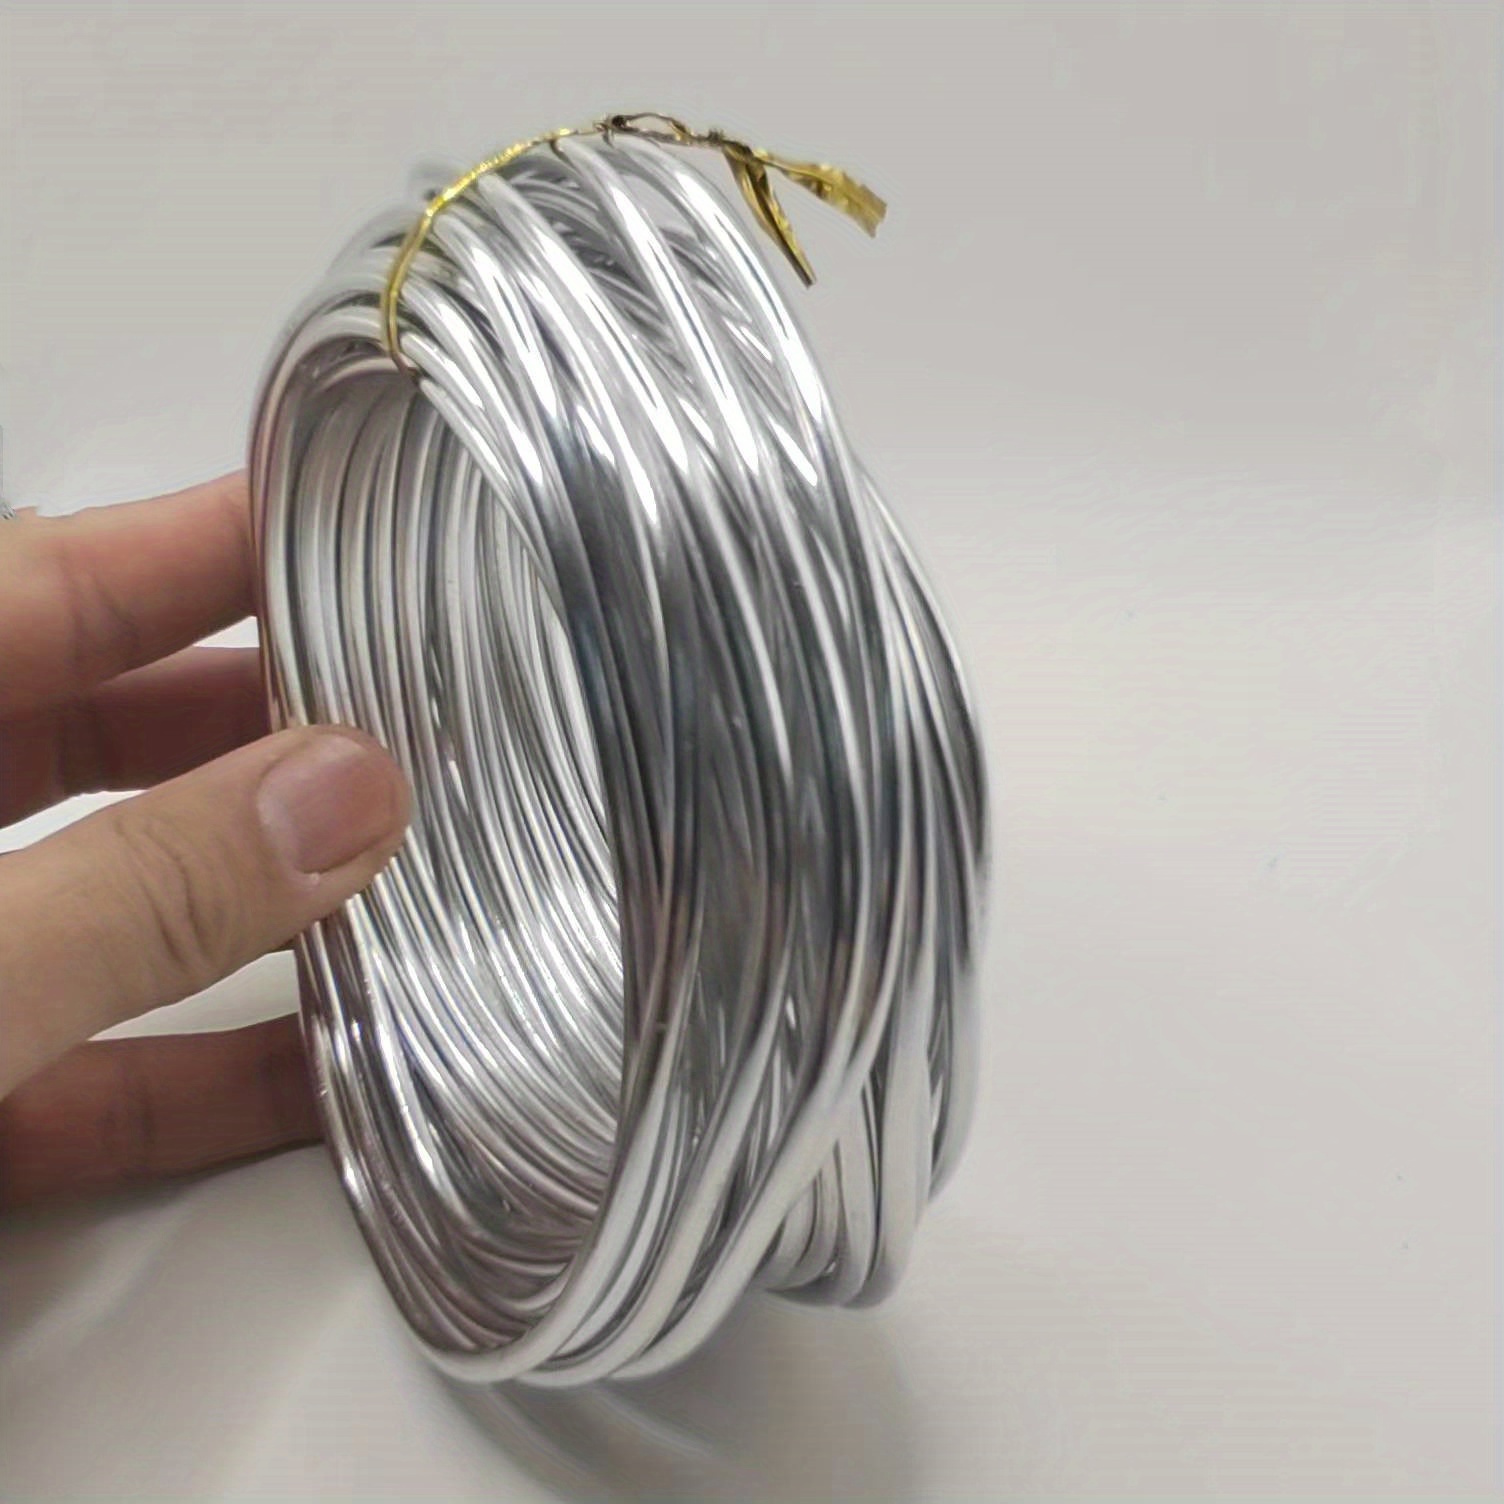 Mr. Pen- Aluminum Wire, 1.5 mm, 32.5 Feet, 1 Roll, Craft Wire, Metal Wire,  Armature Wire, Crafting Wire, Bendable Wire, Wire for Crafts, Sculpting  Wire, Doll Ar…